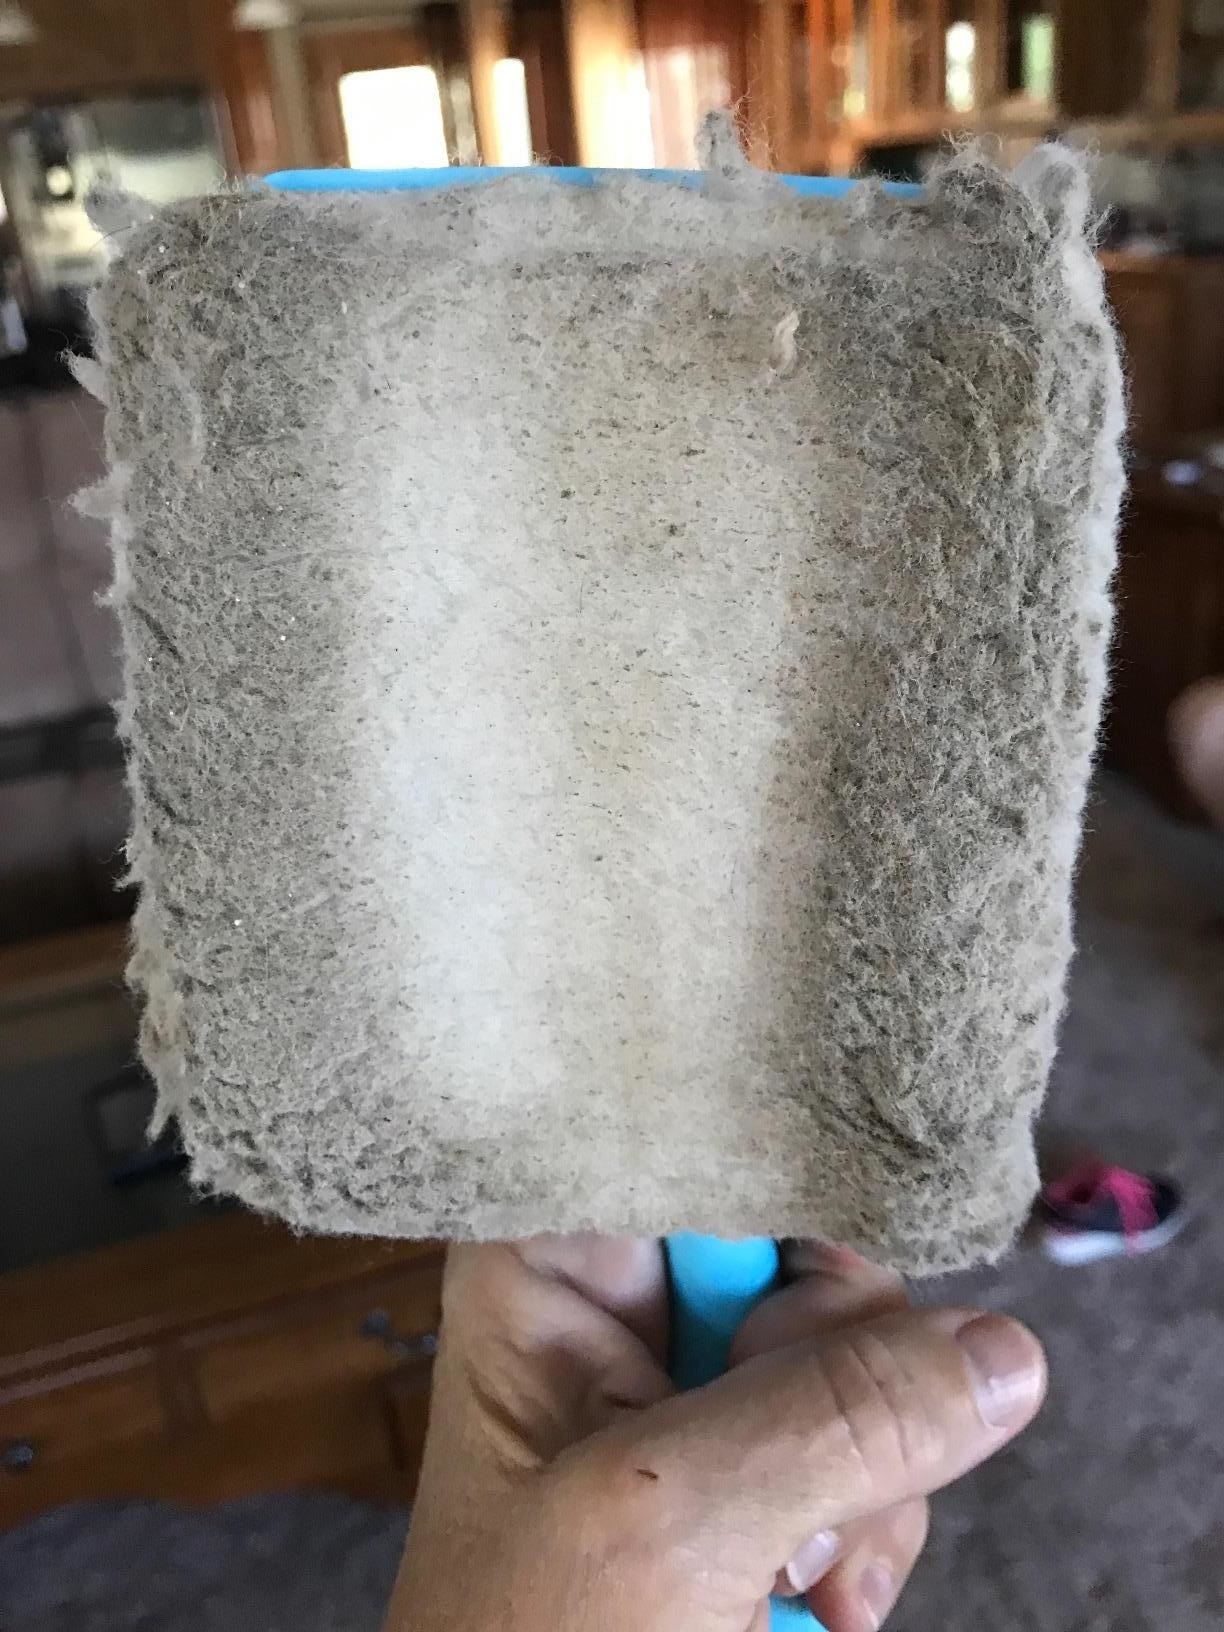 a reviewer photo showing the dust collected on the head of the baseboard cleaner